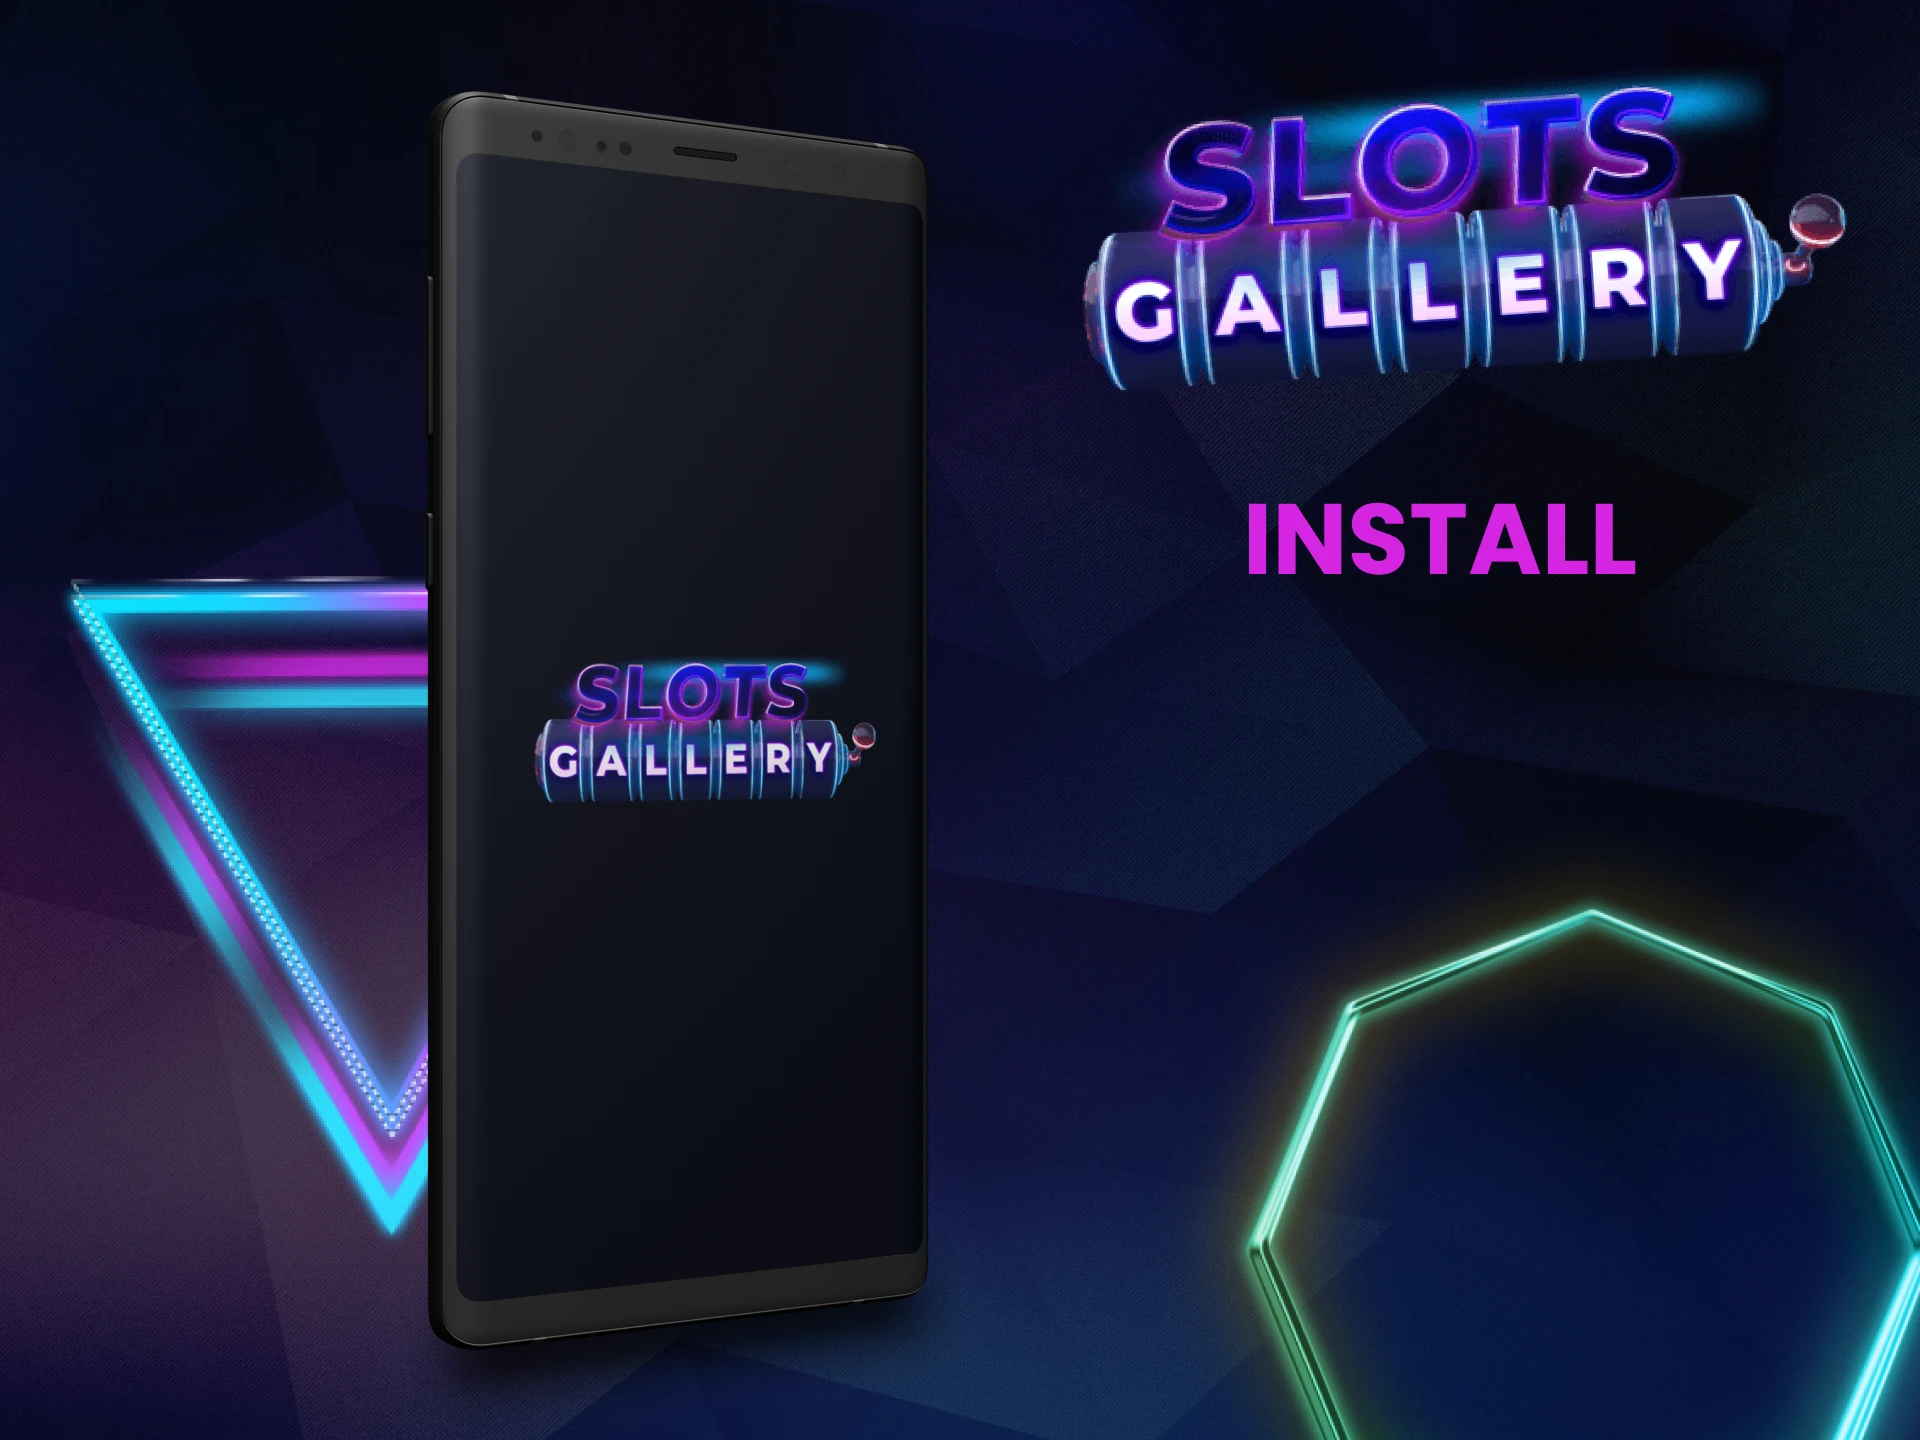 We will tell you how to install the Slots Gallery application.